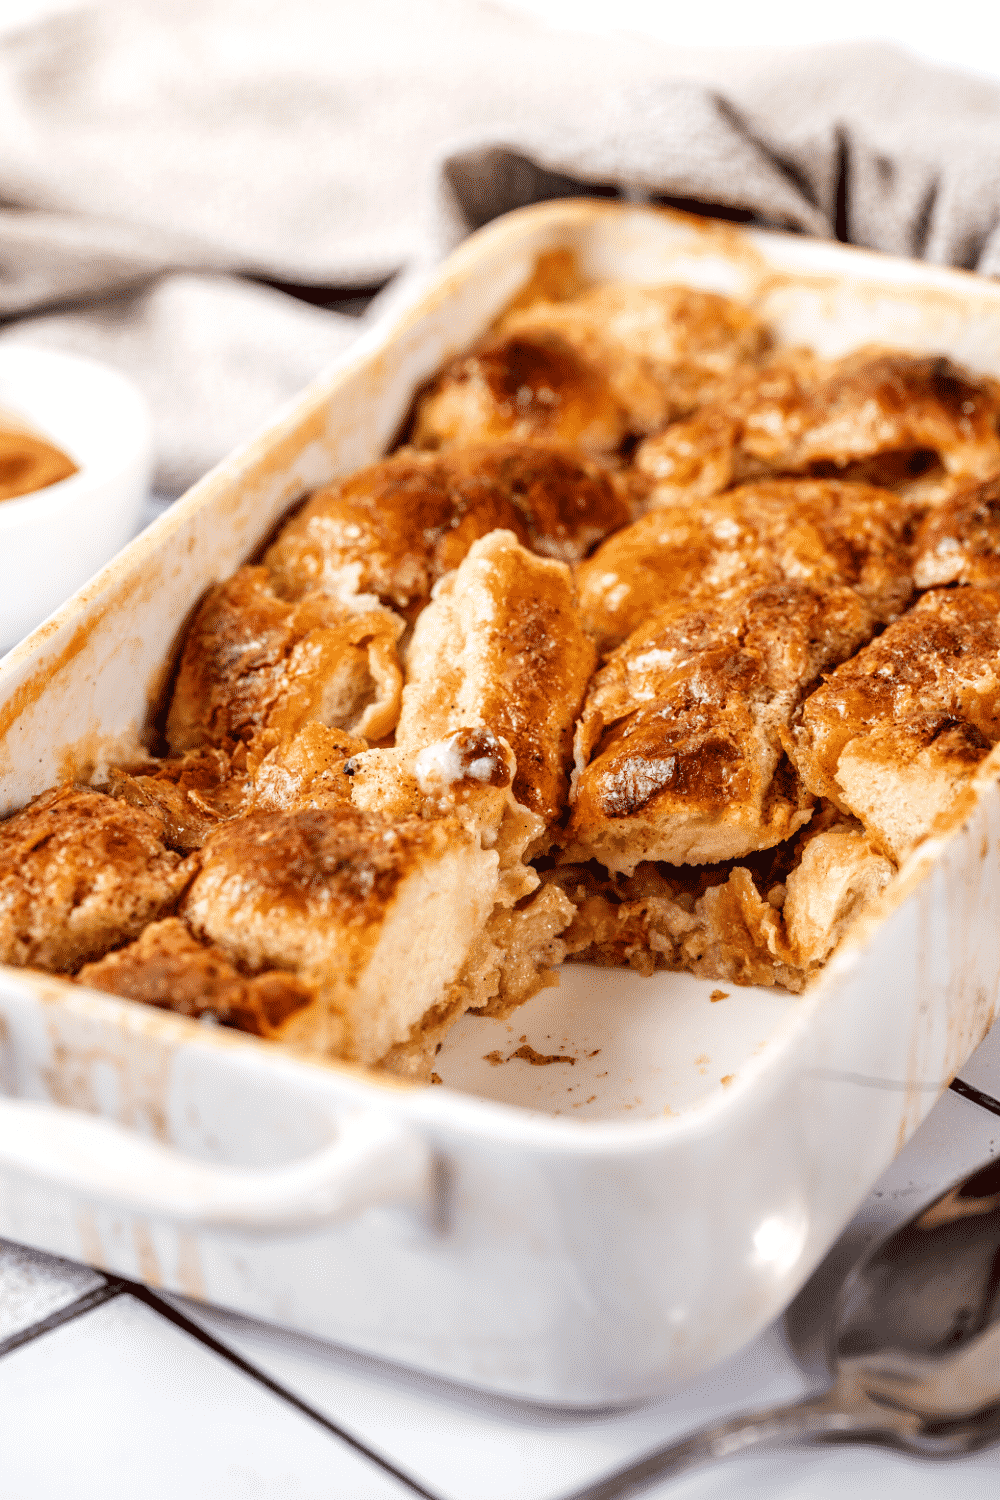 White casserole dish with bread pudding in it. There is a chunk of bread pudding taken out of the front of the casserole dish.